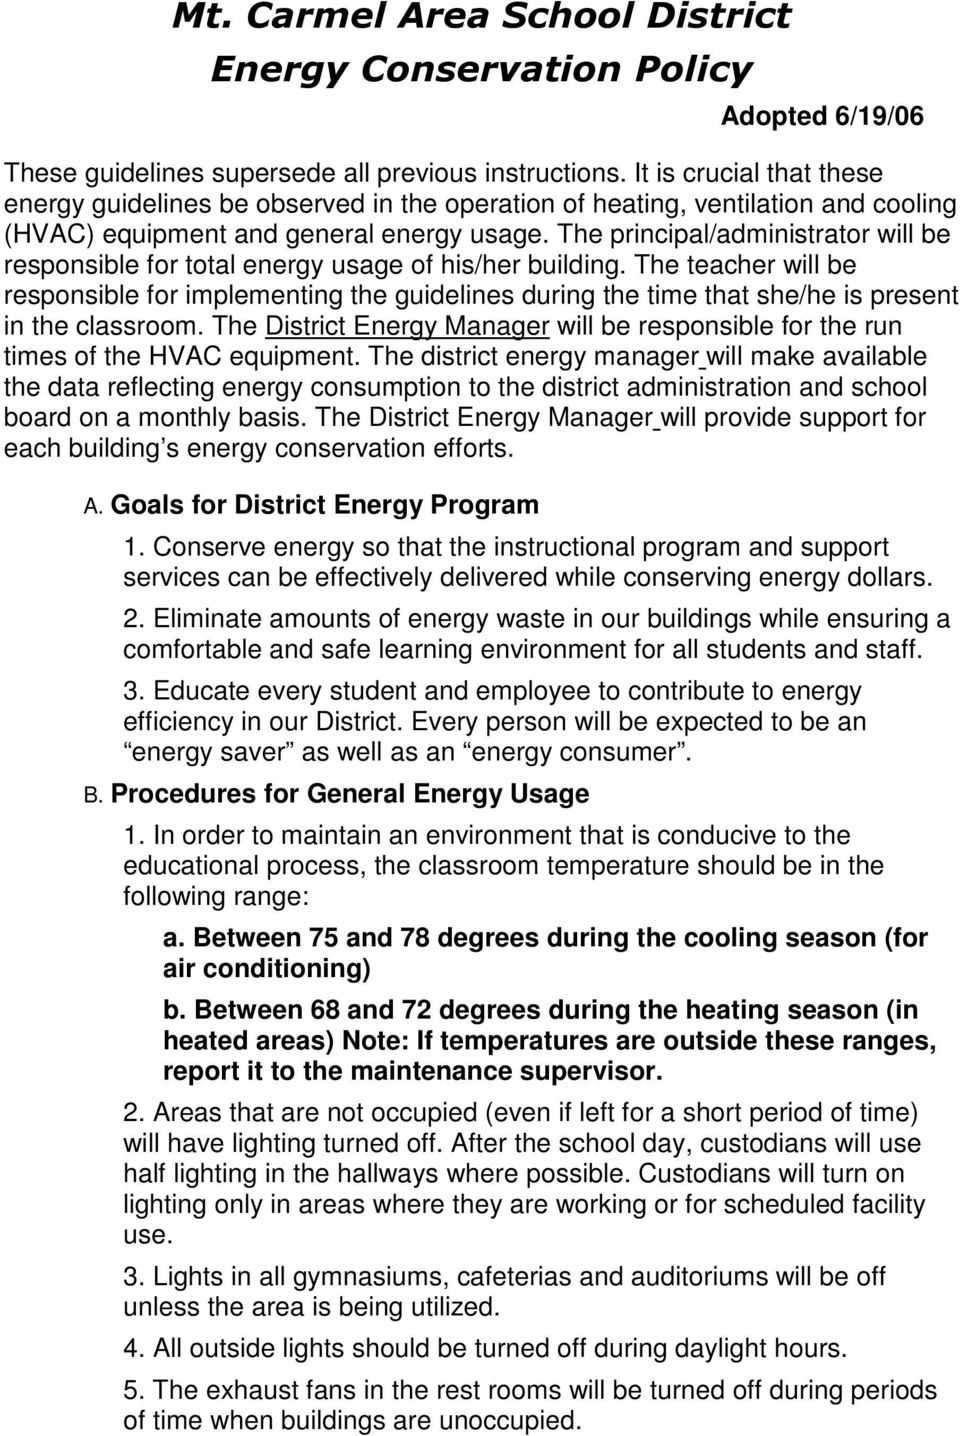 The principal/administrator will be responsible for total energy usage of his/her building.